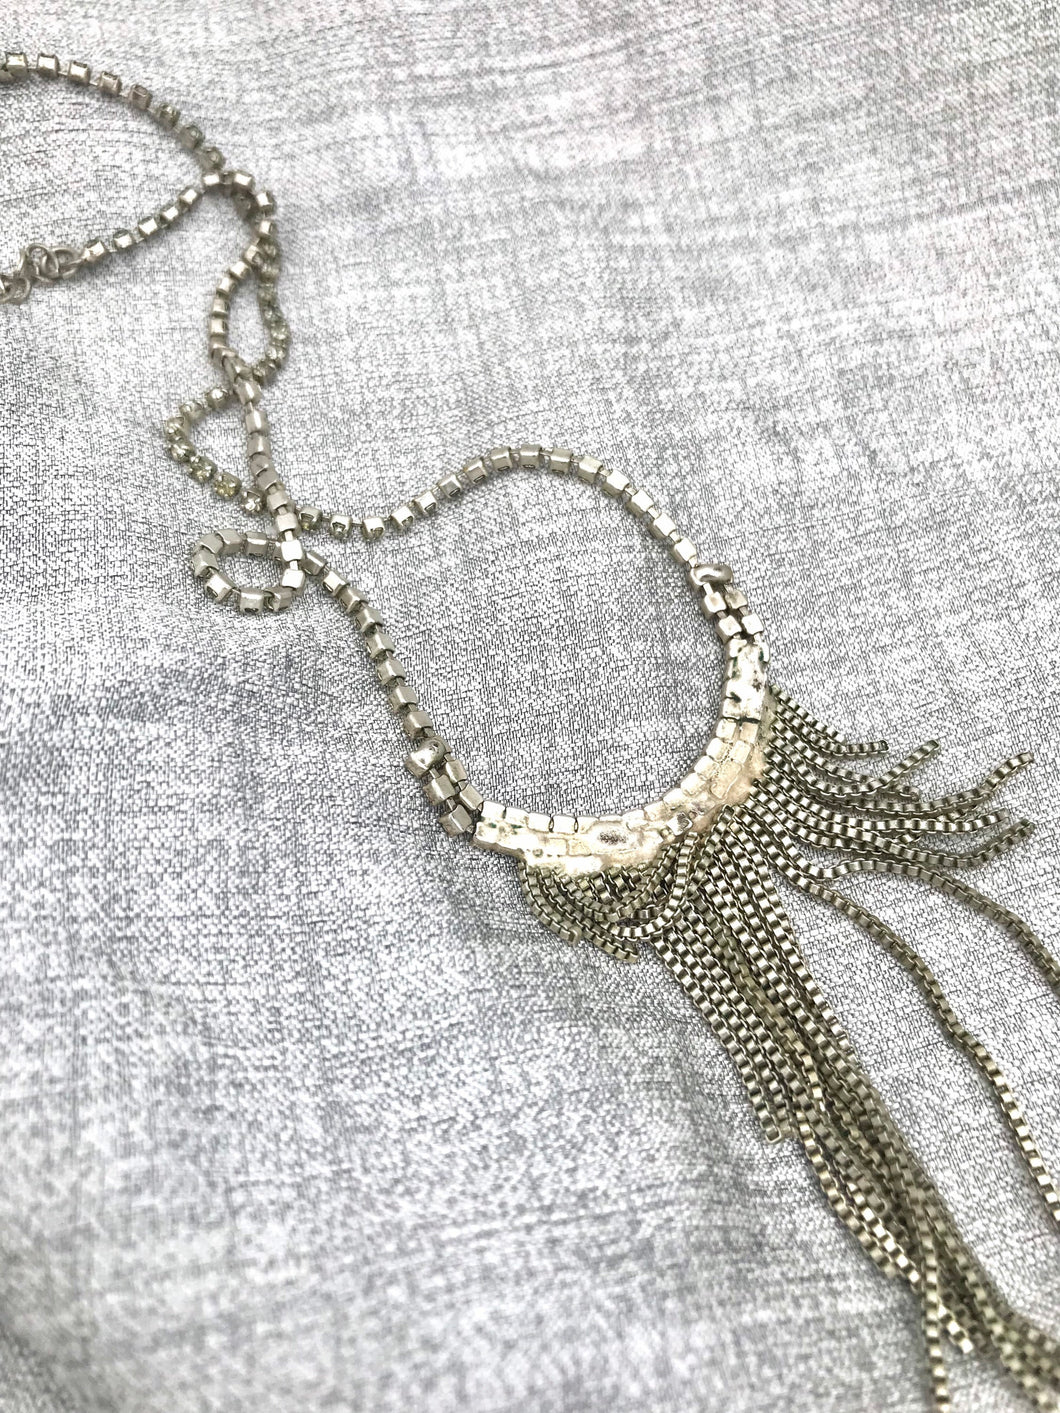 Elegant Silver 1970s Fringe necklace, Silver tone flat link dangling necklace, Retro Silver Necklace Chain with Chain Fringe